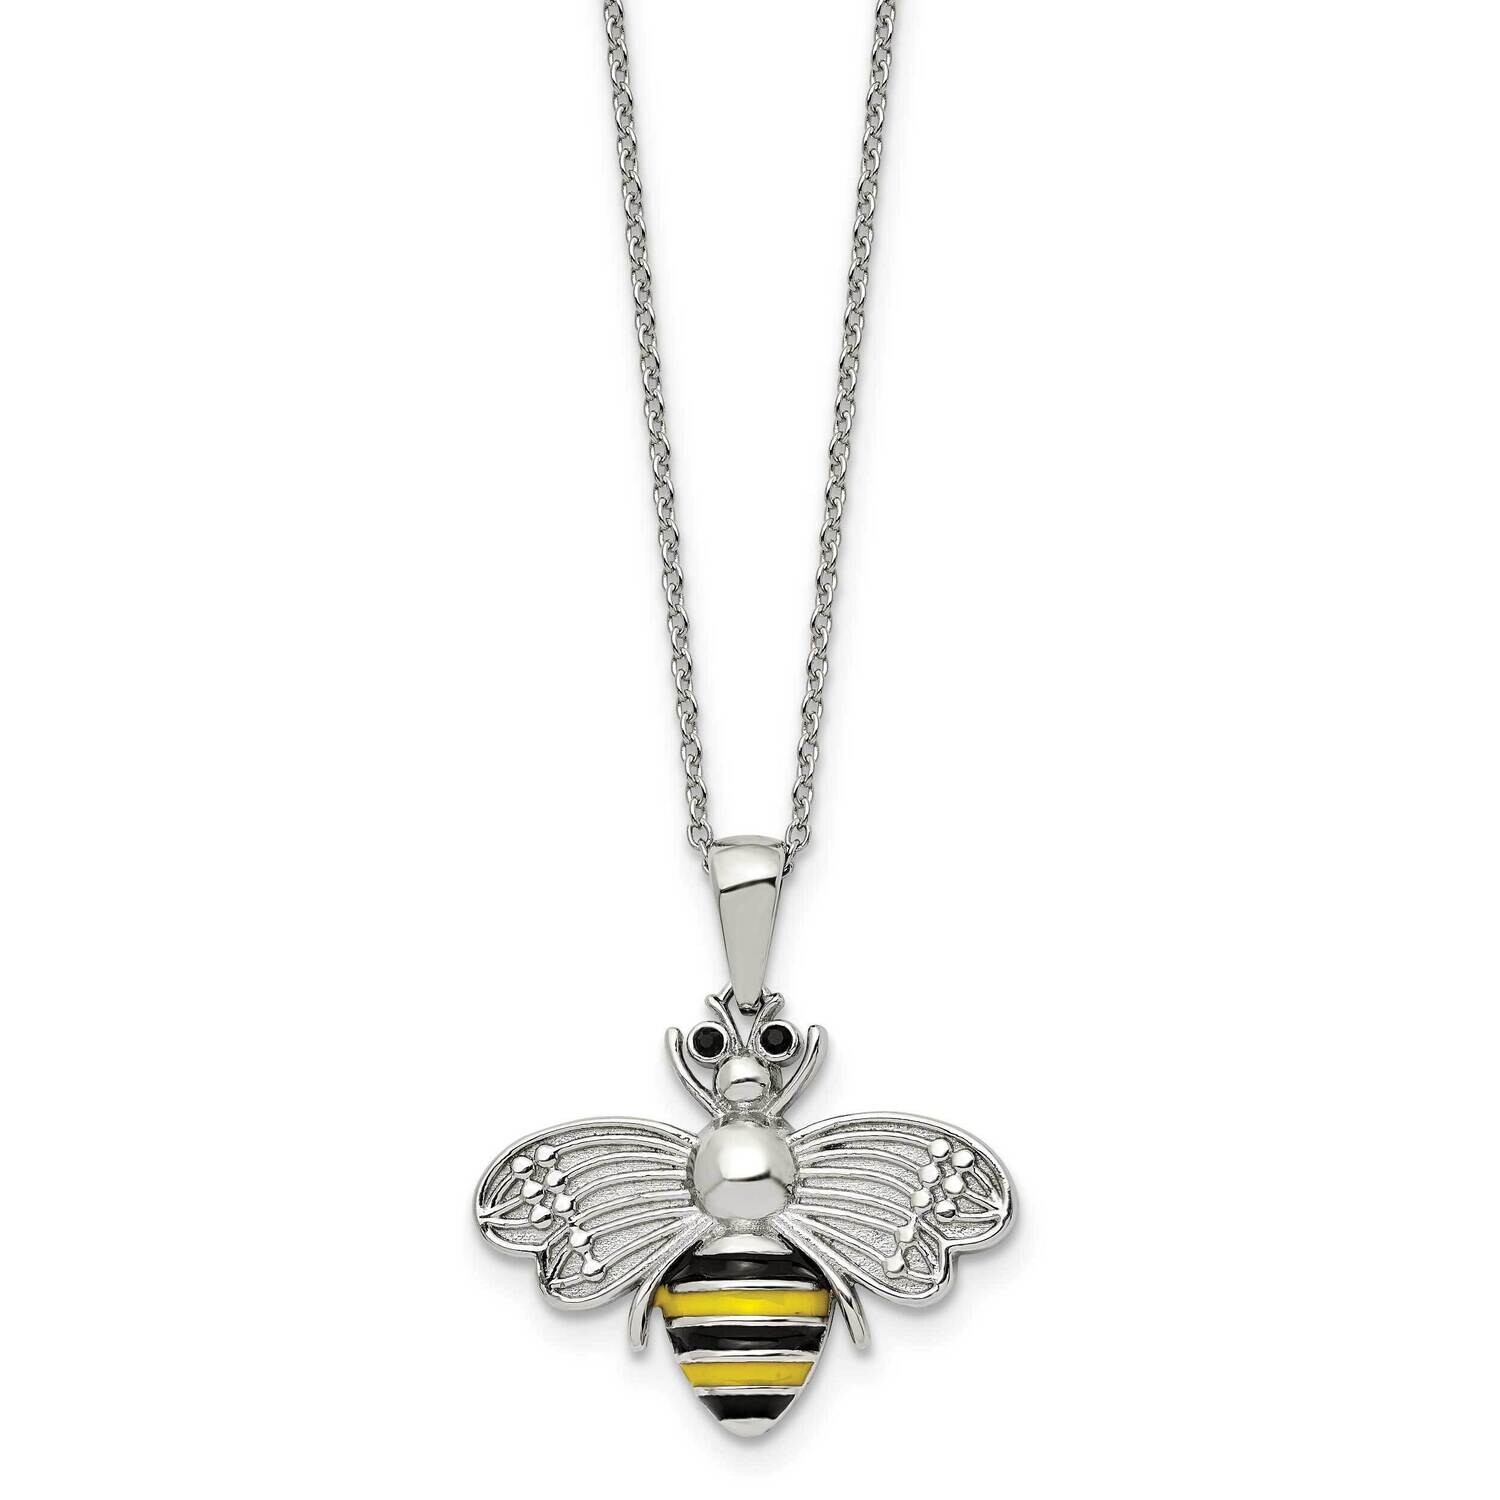 Chisel Polished Enameled Preciosa Crystal Bee Pendant On A 17.75 Inch Cable Chain 2 Inch Extension Necklace Stainless Steel SRN3072-17.75